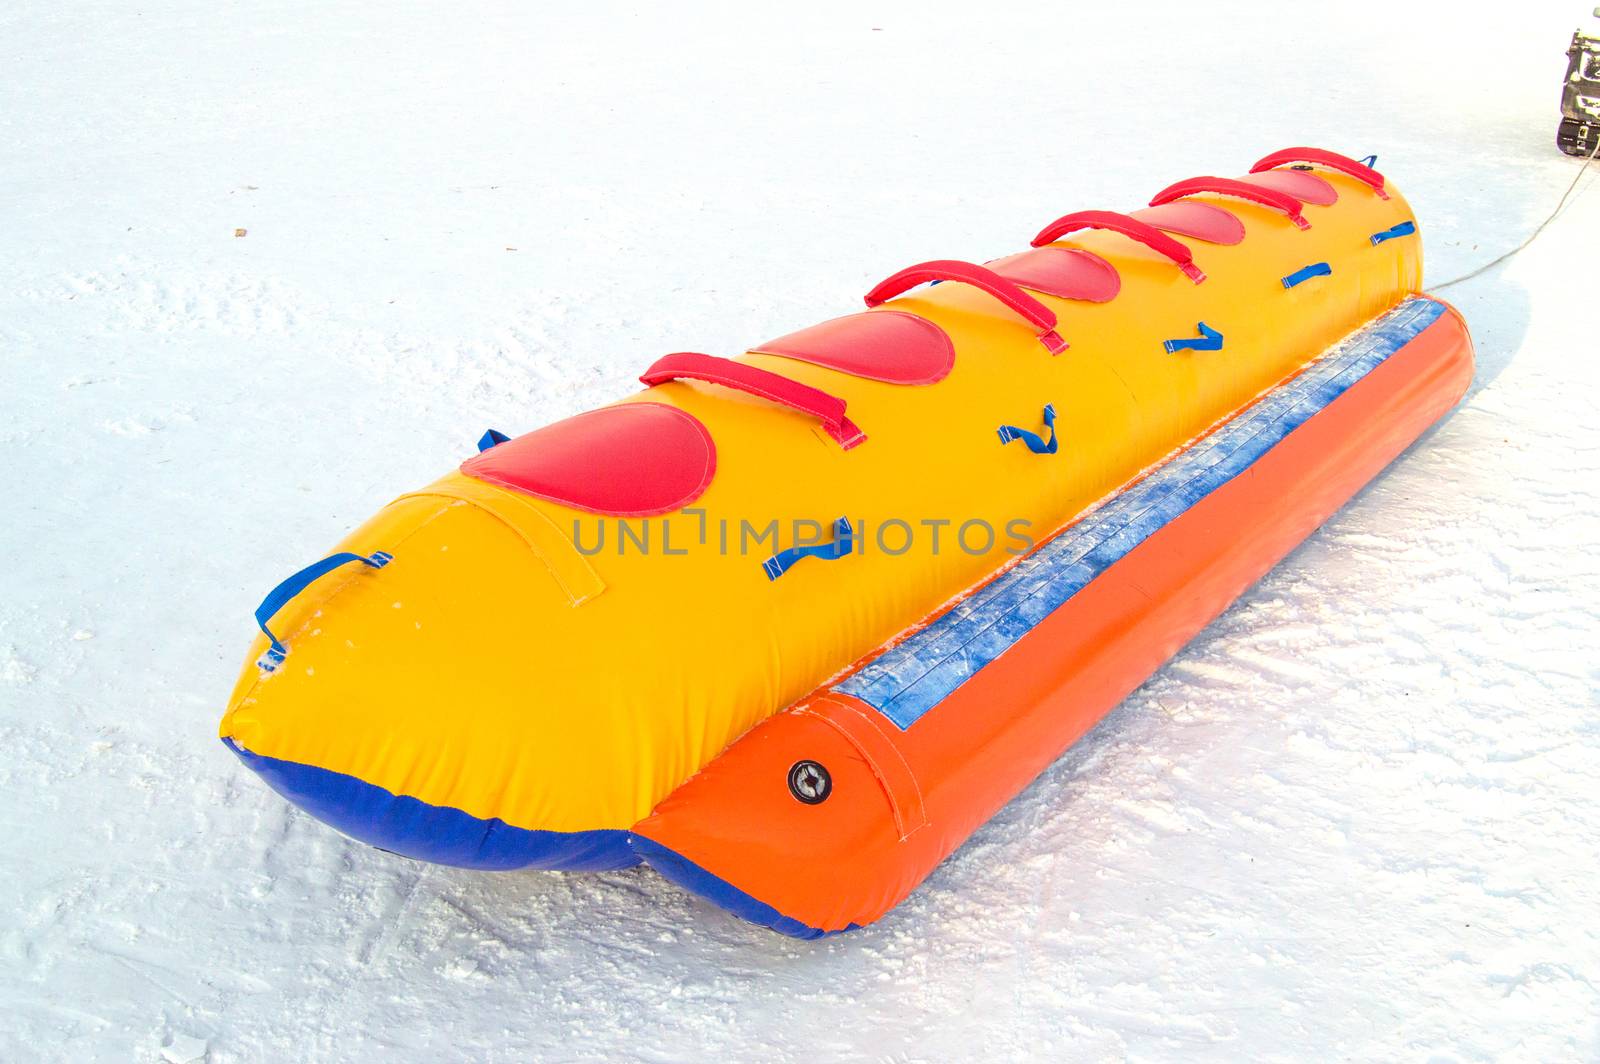 Inflatable rubber multi-seat sleigh for high-speed snow skiing in winter, winter activity concept and Christmas fun by claire_lucia